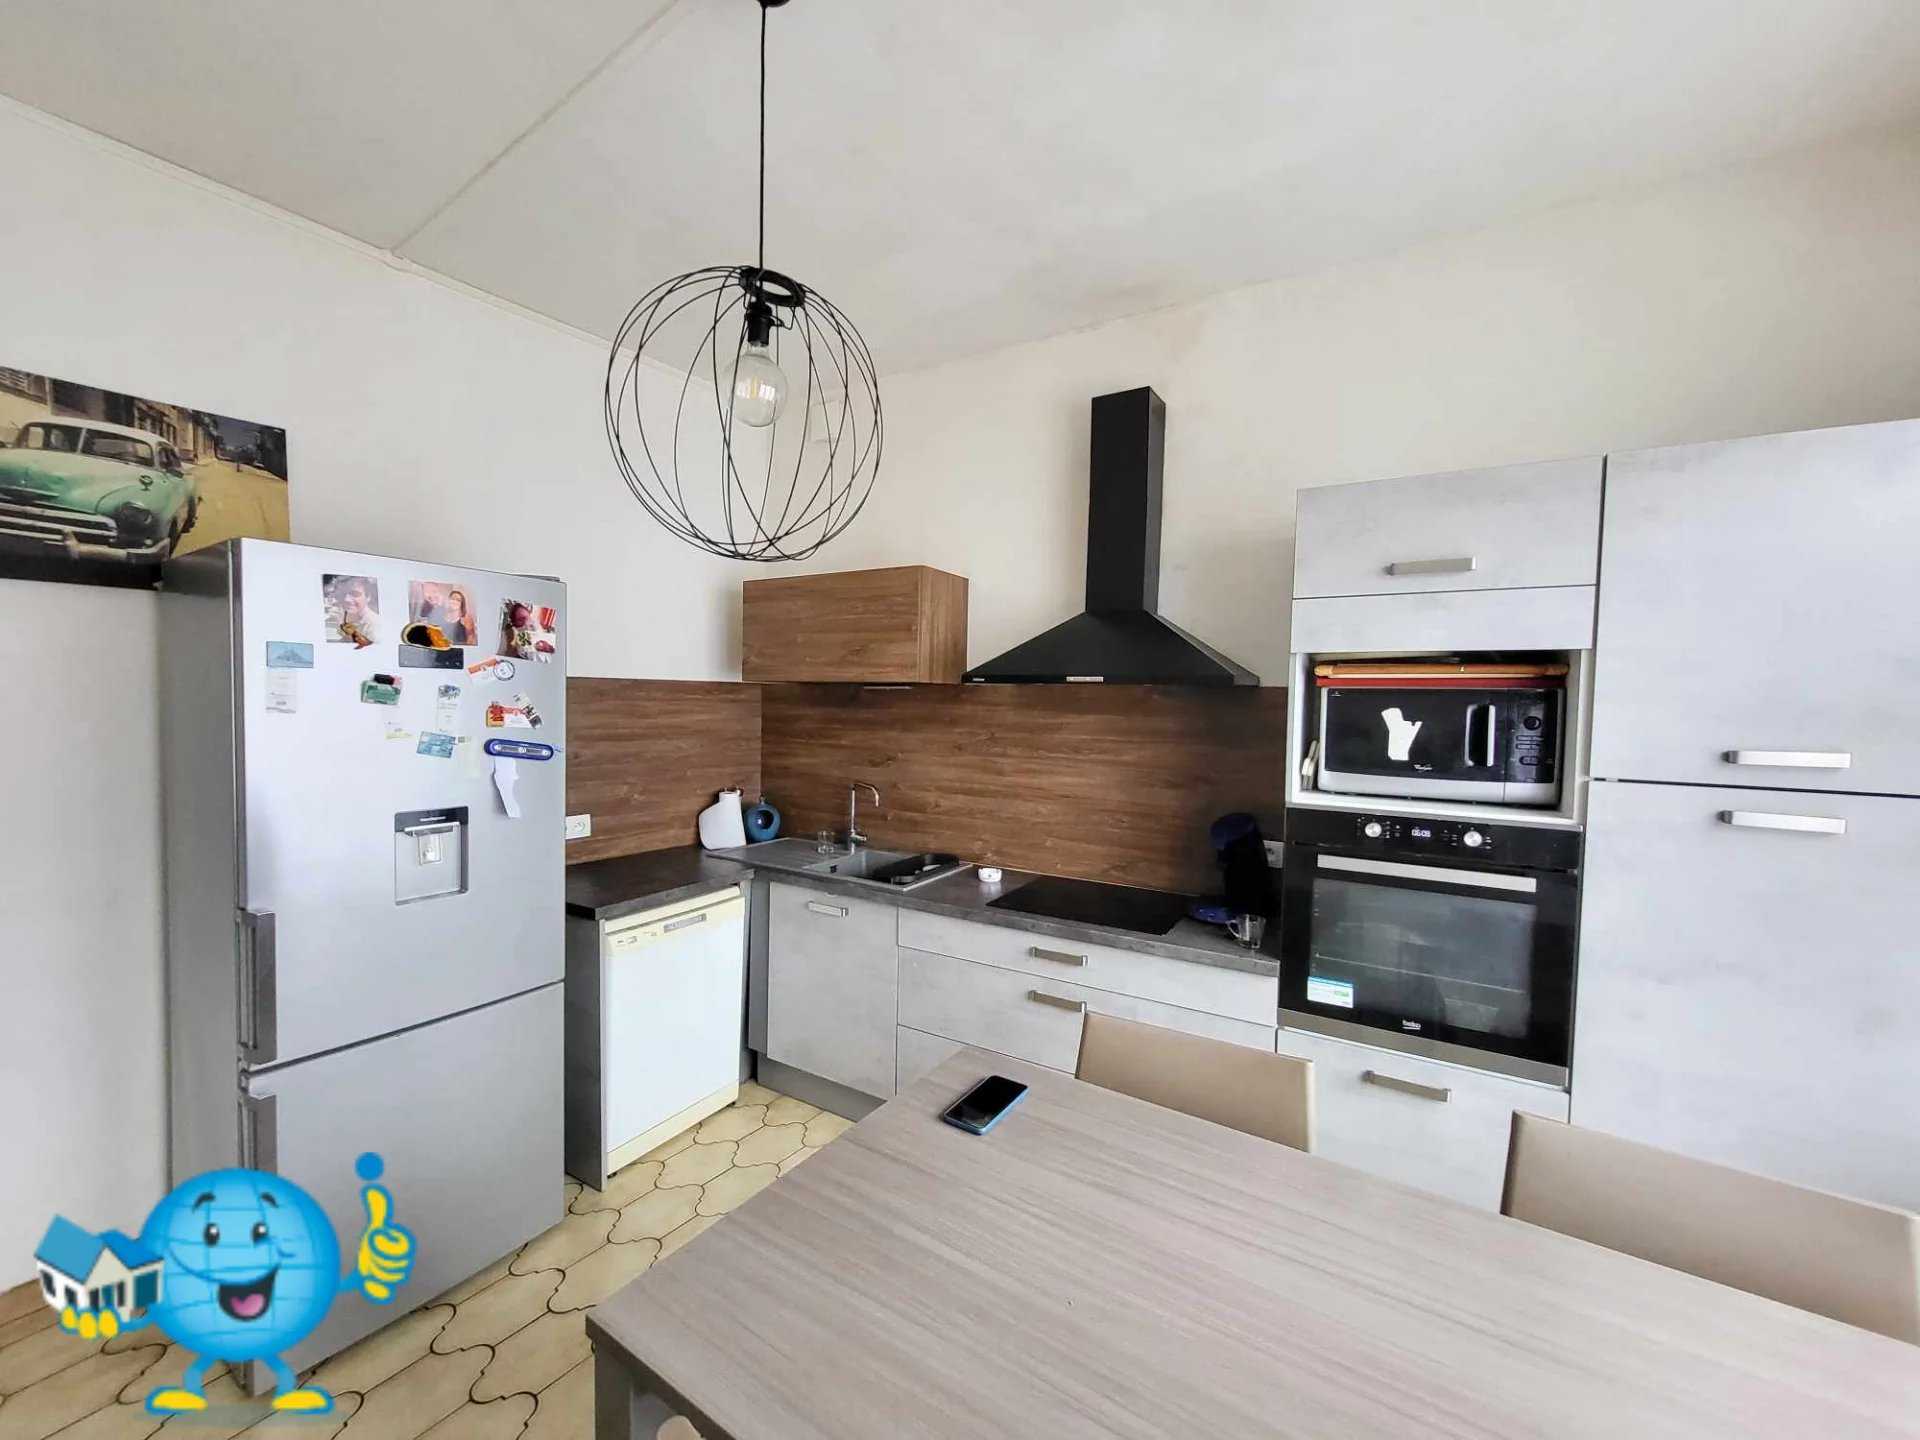 Residential in Pont-sur-Sambre, Nord 12523456